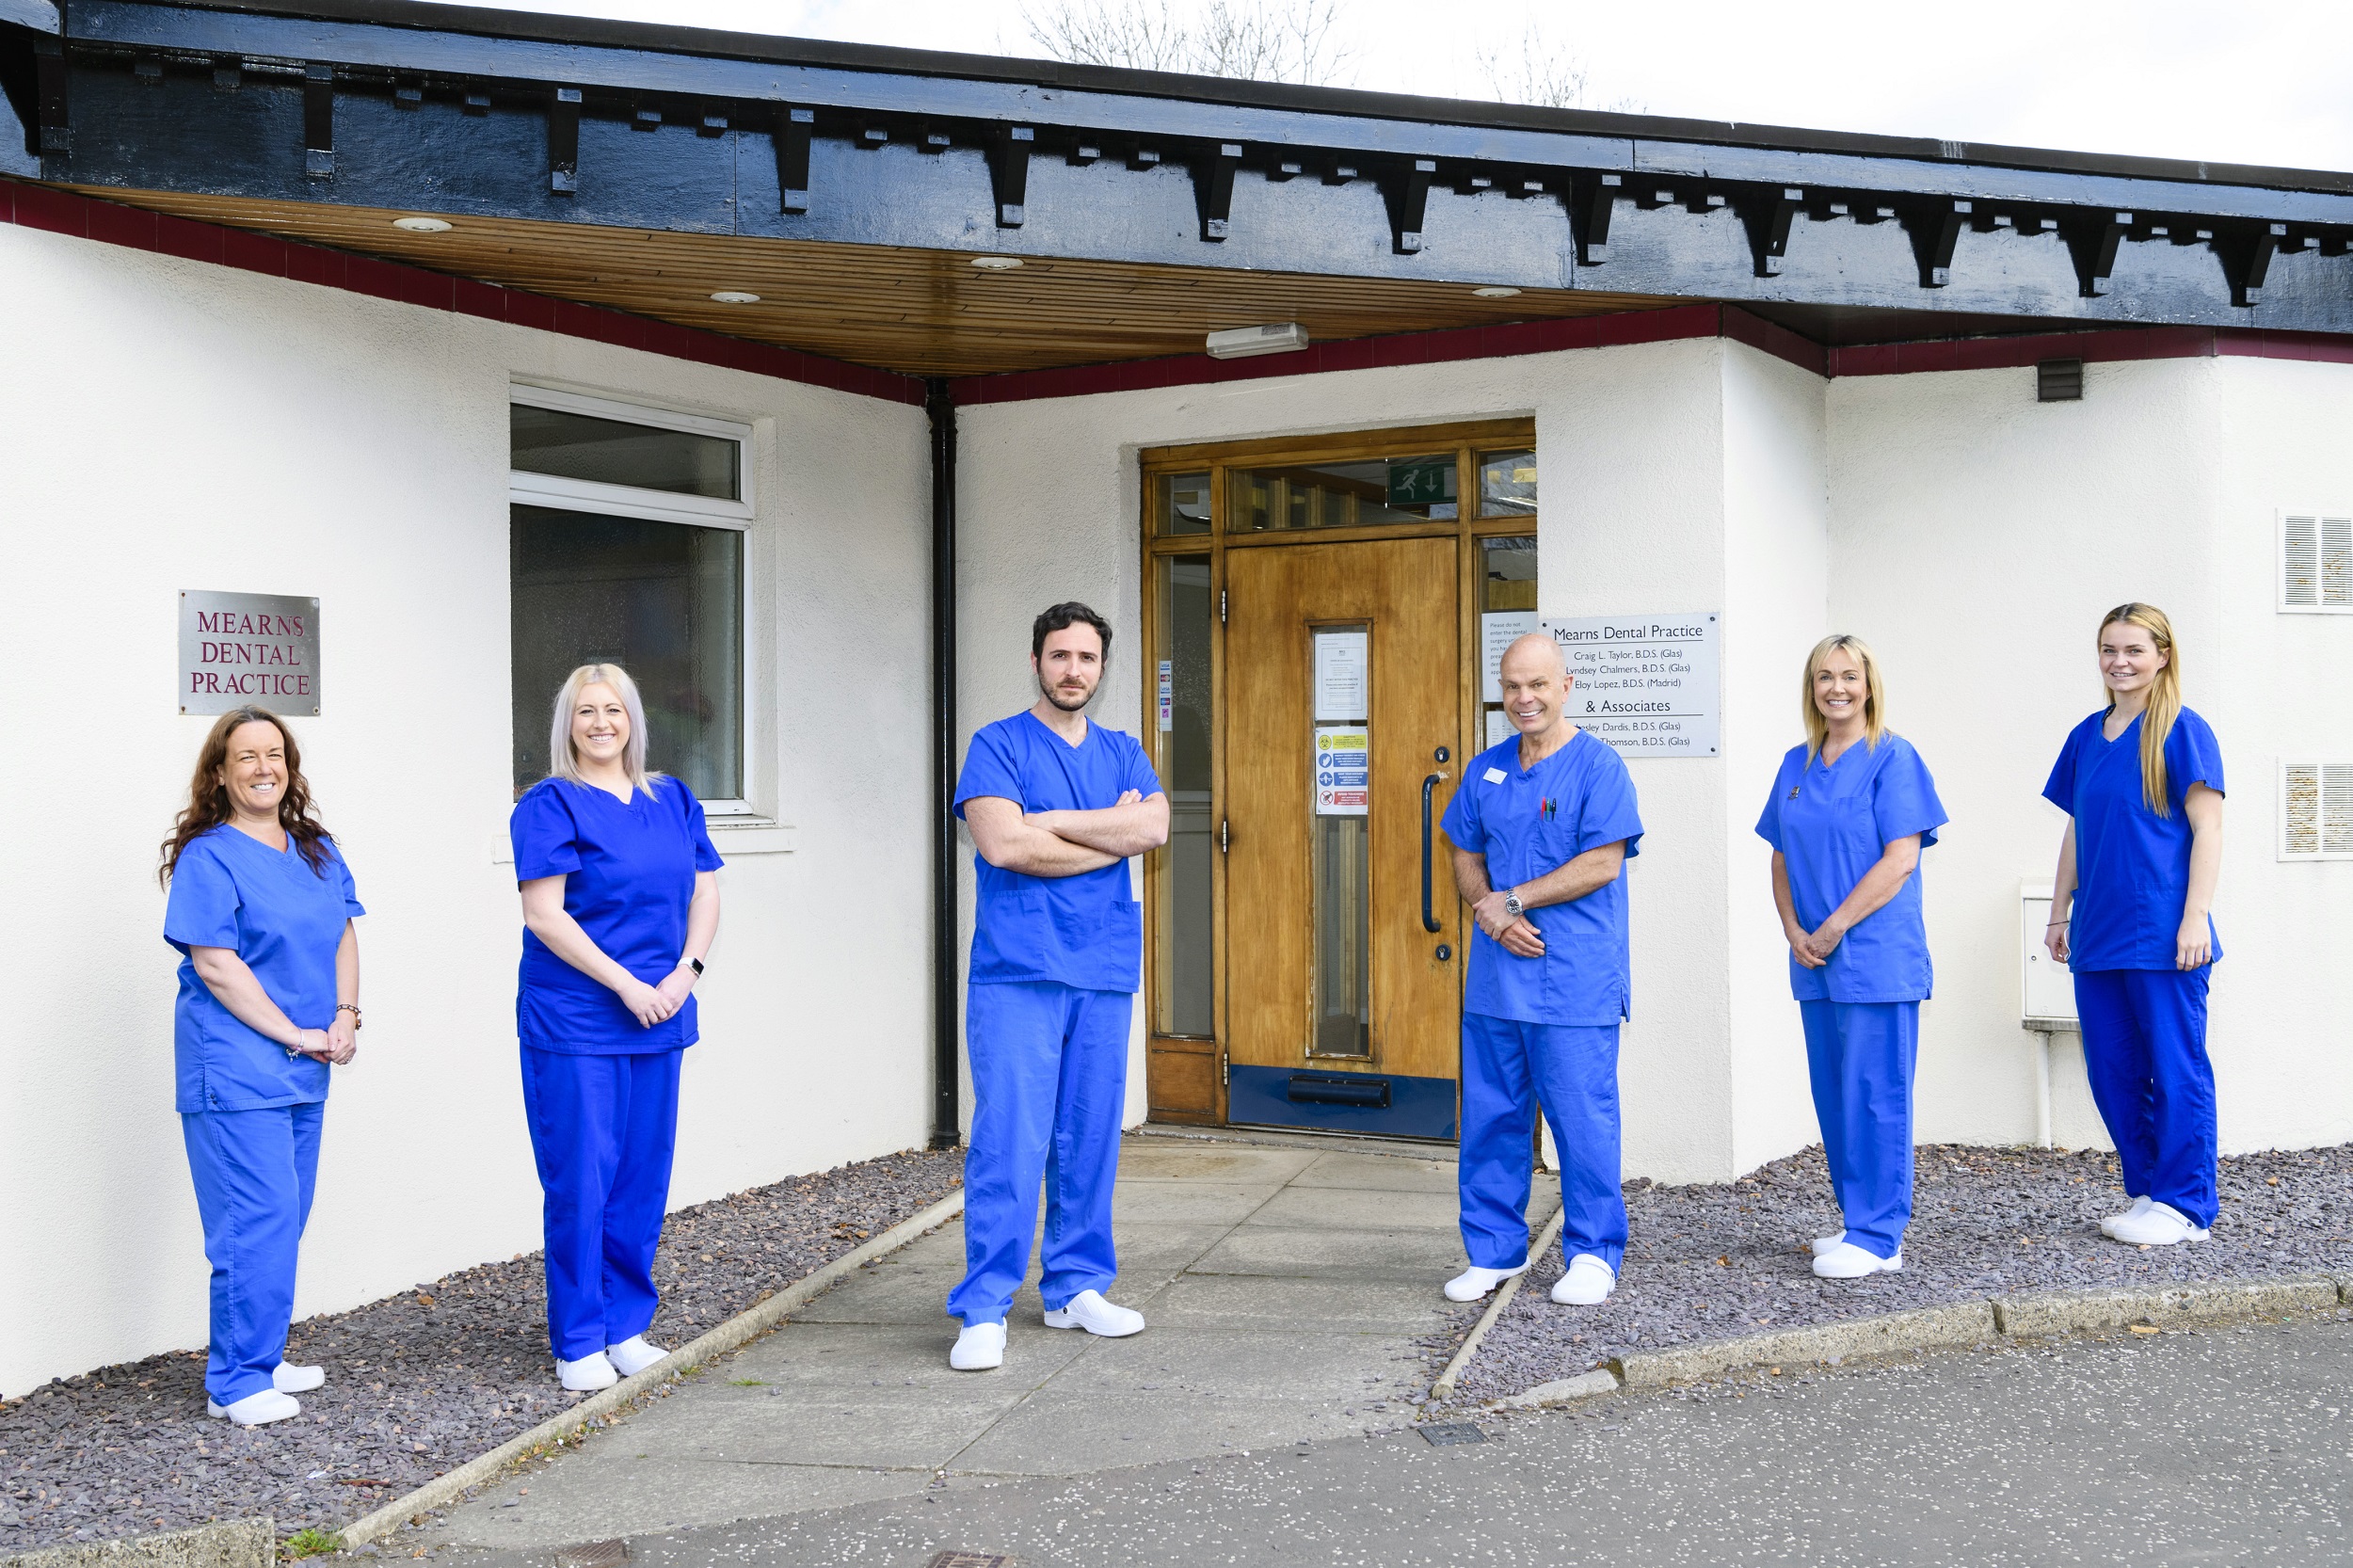 Clyde Munro Dental Group breaks 50 practice milestone following latest acquisition